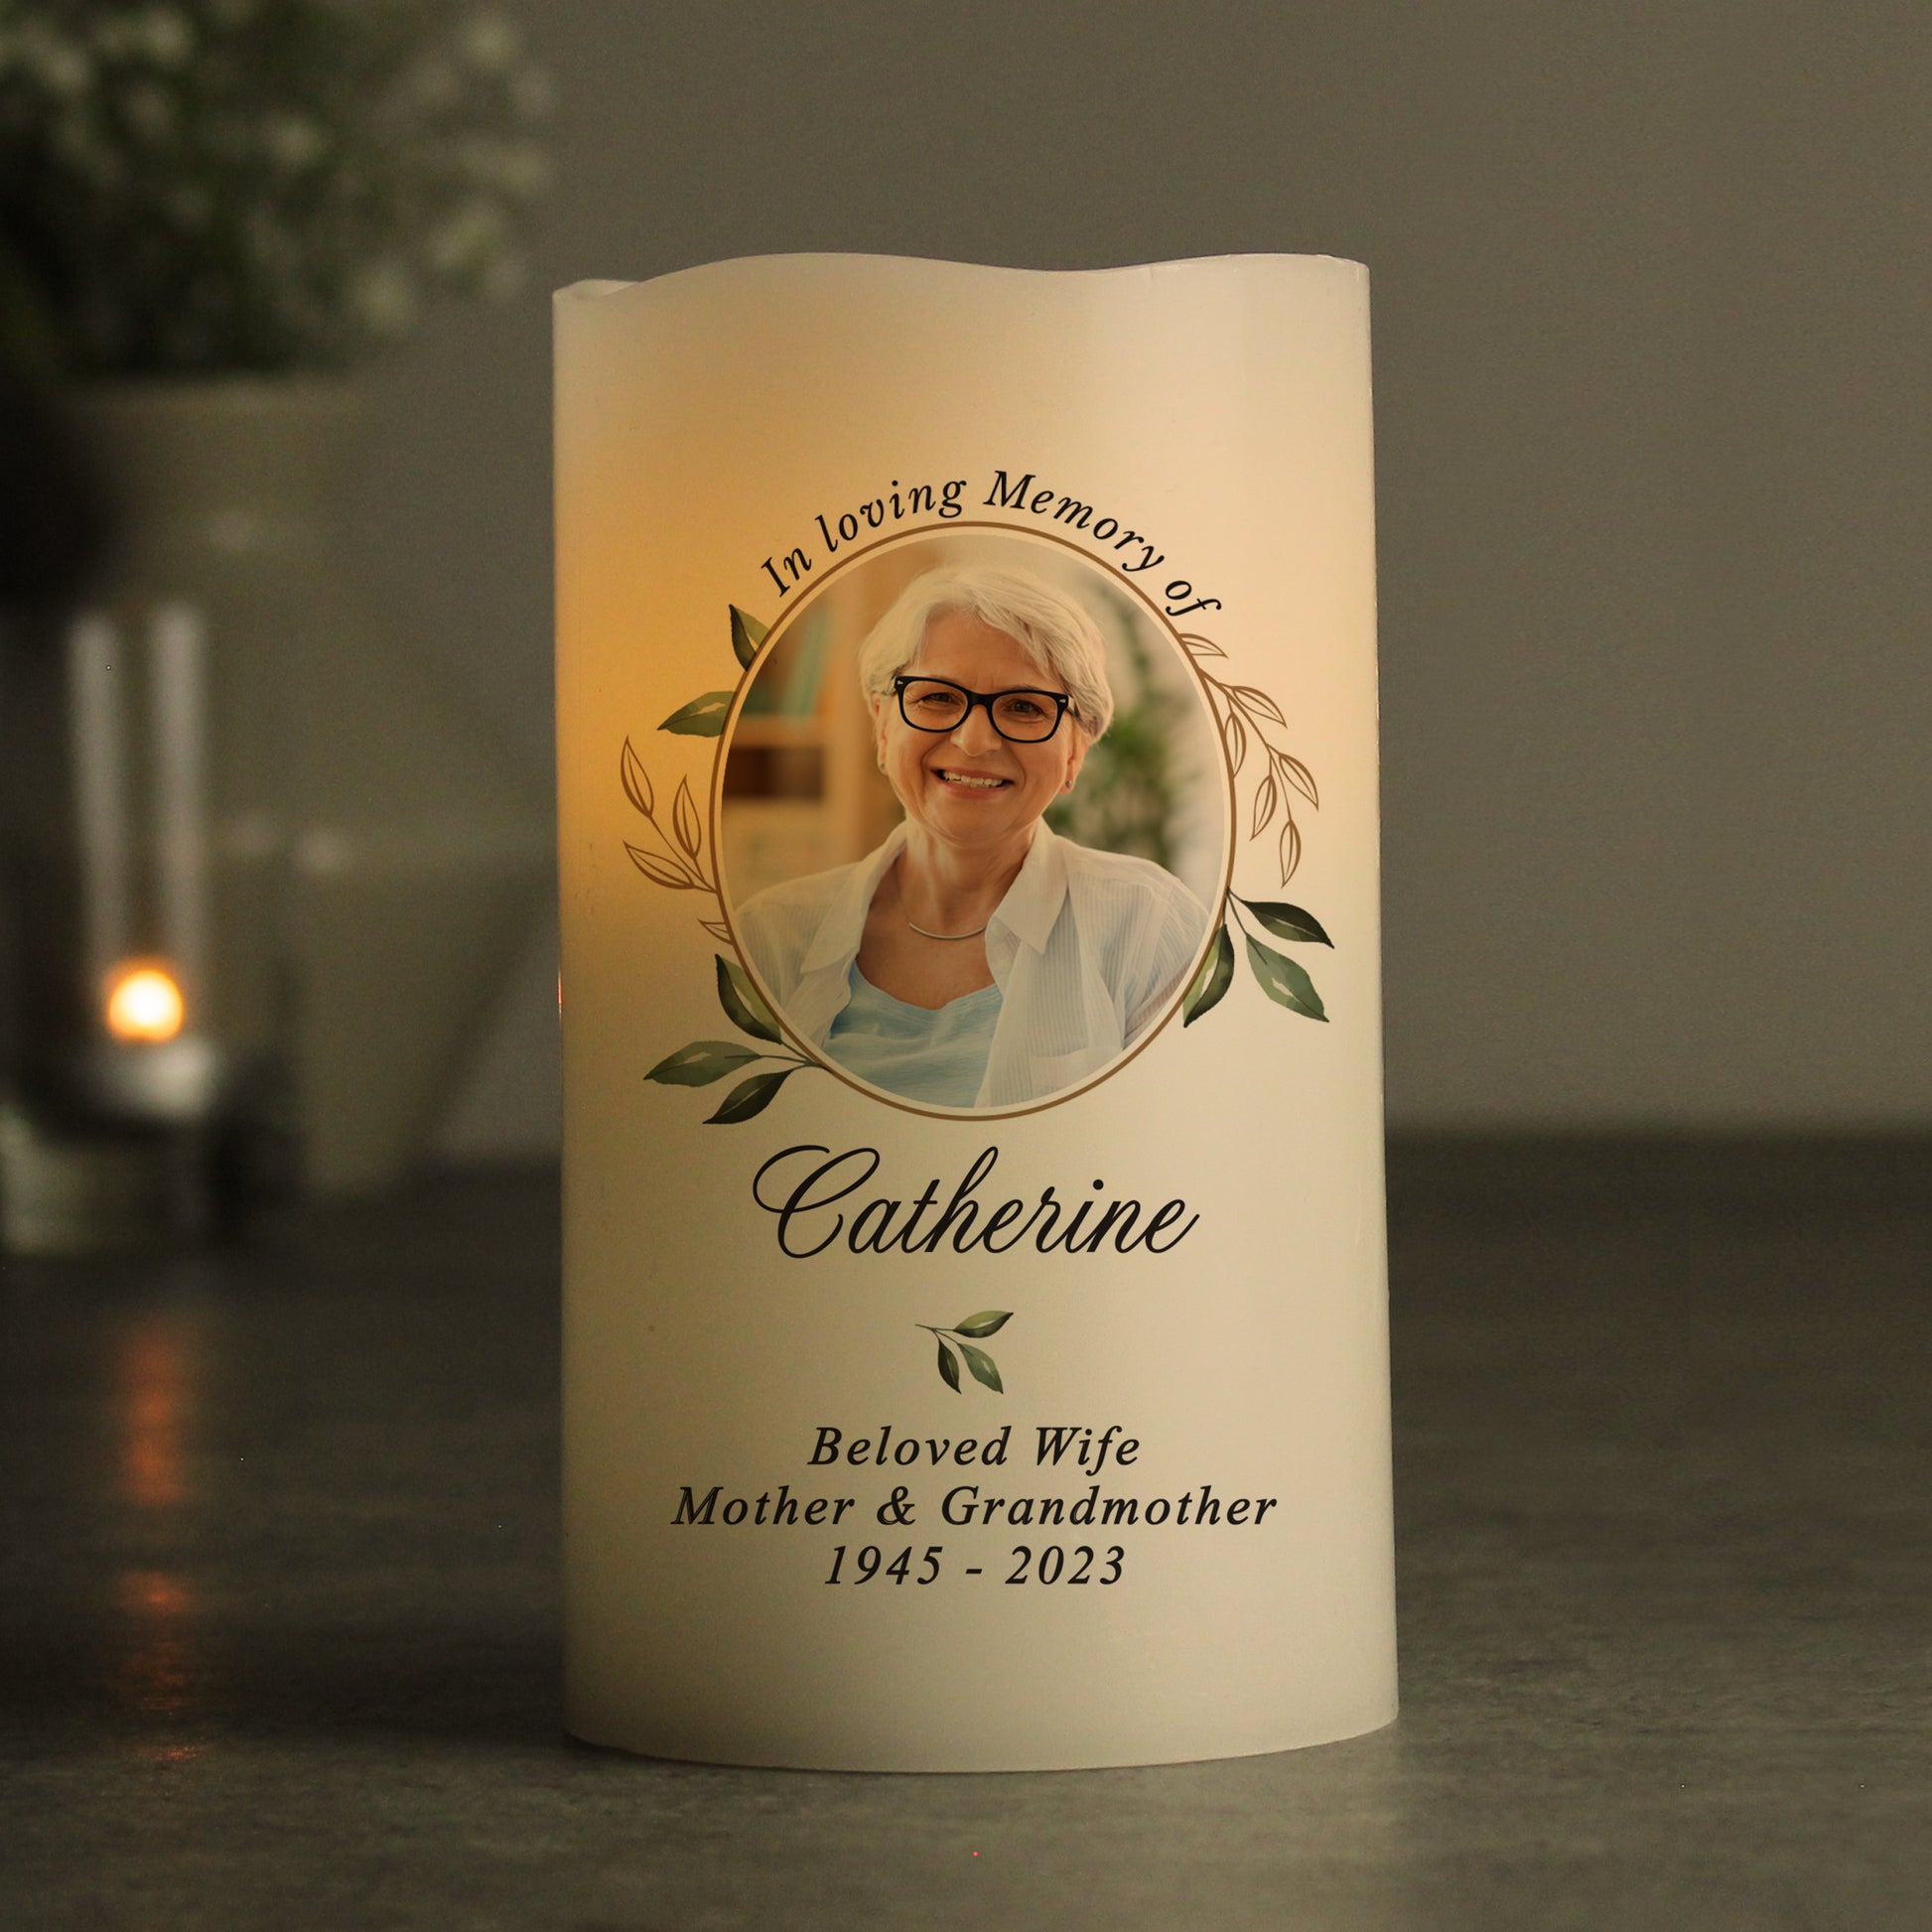 Personalised Memorial LED Pilar Candle - UPLOAD YOUR OWN PHOTO! - Violet Belle Gifts - Personalised Memorial LED Pilar Candle - UPLOAD YOUR OWN PHOTO!